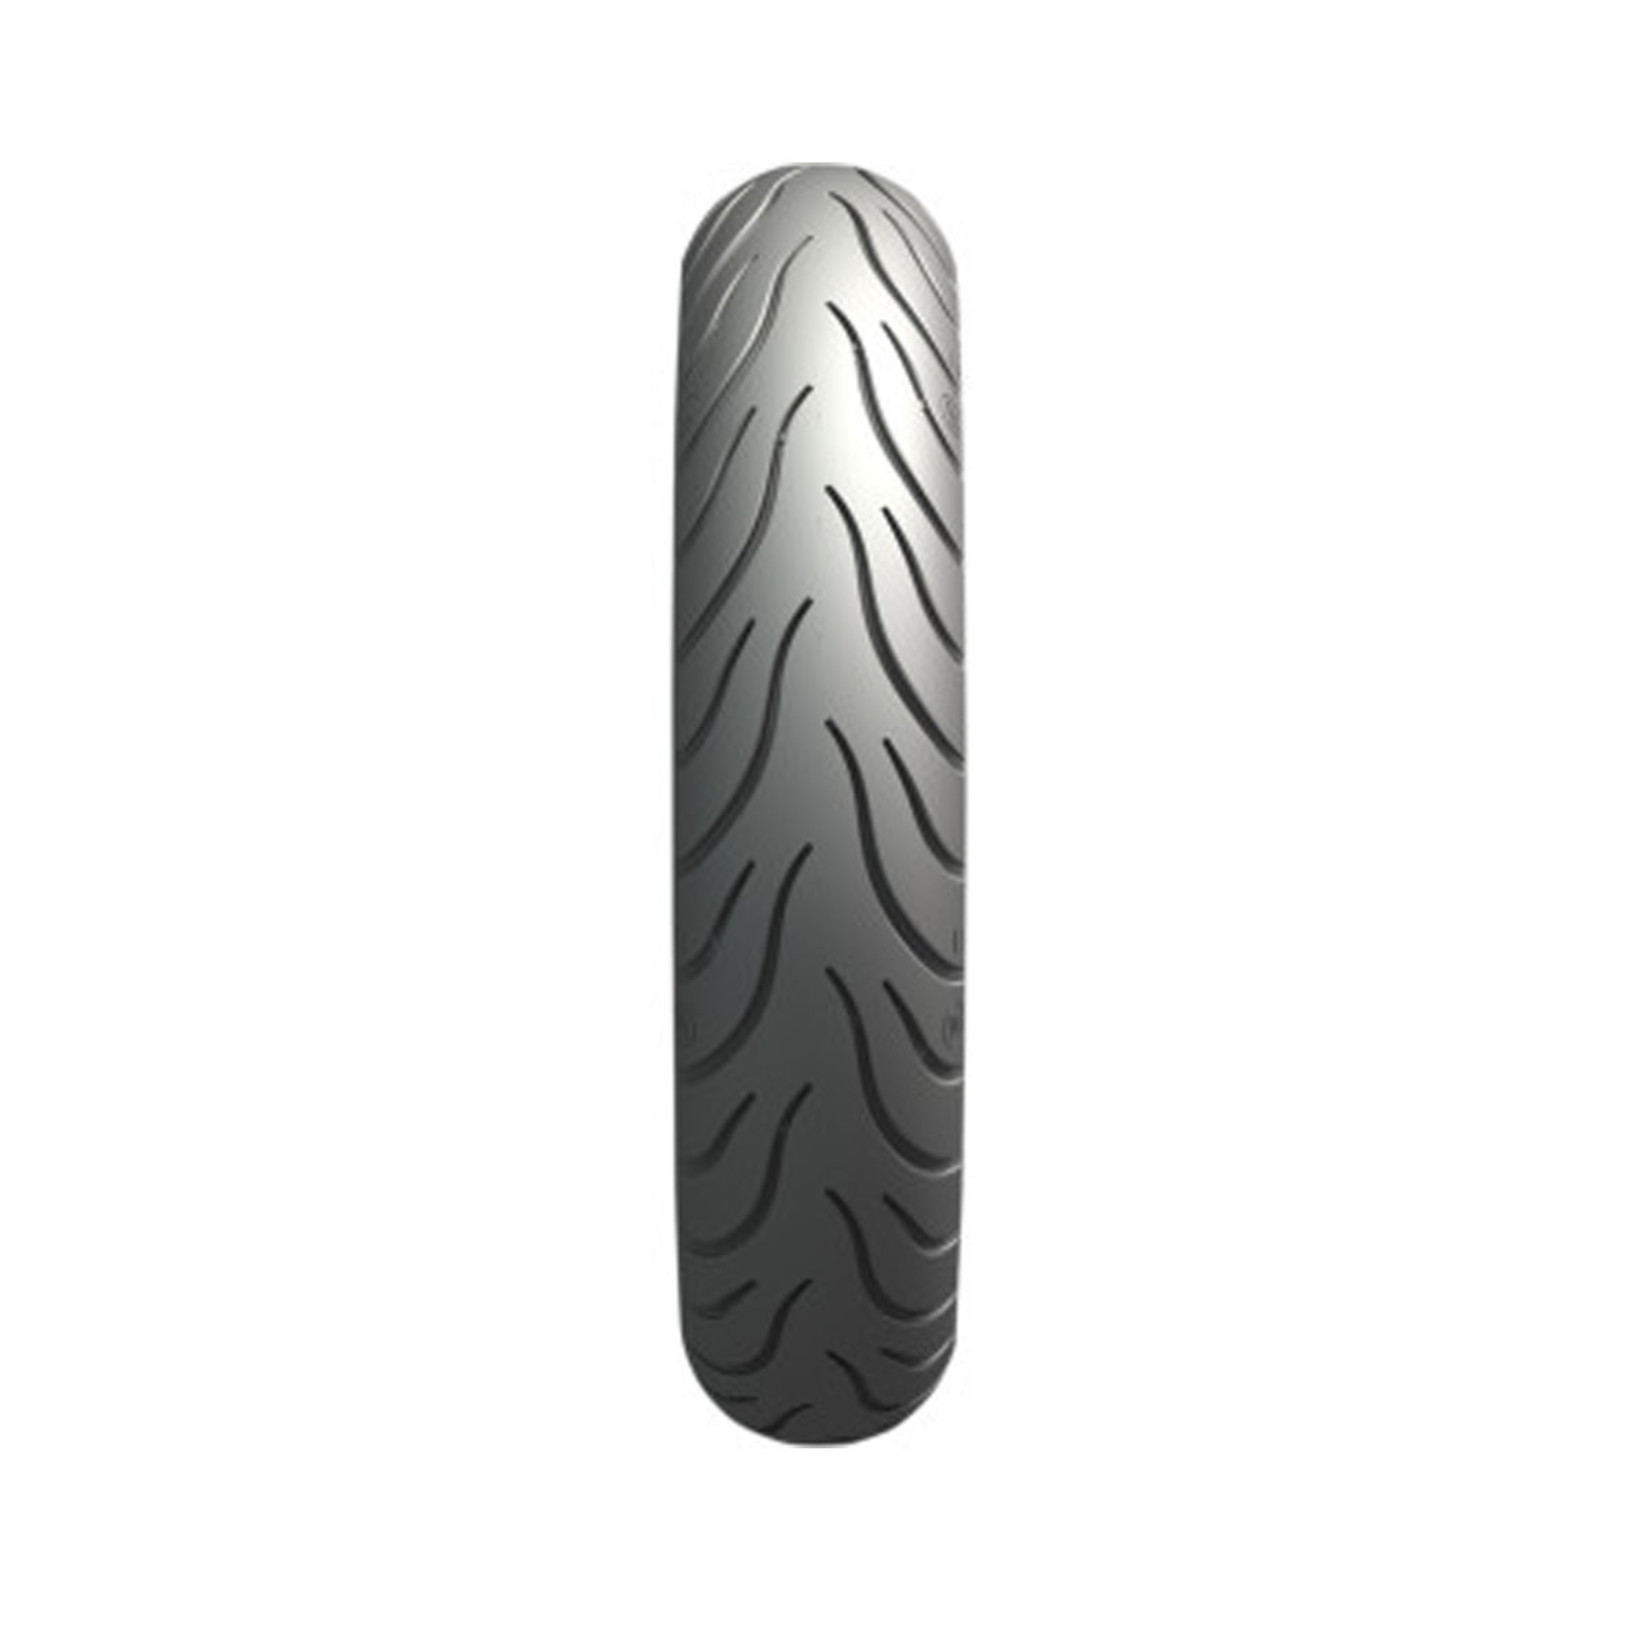 MICHELIN MICHELIN  COMMANDER® III REINFORCED TOURING FRONT TIRE  - 130/90B16 - 73H